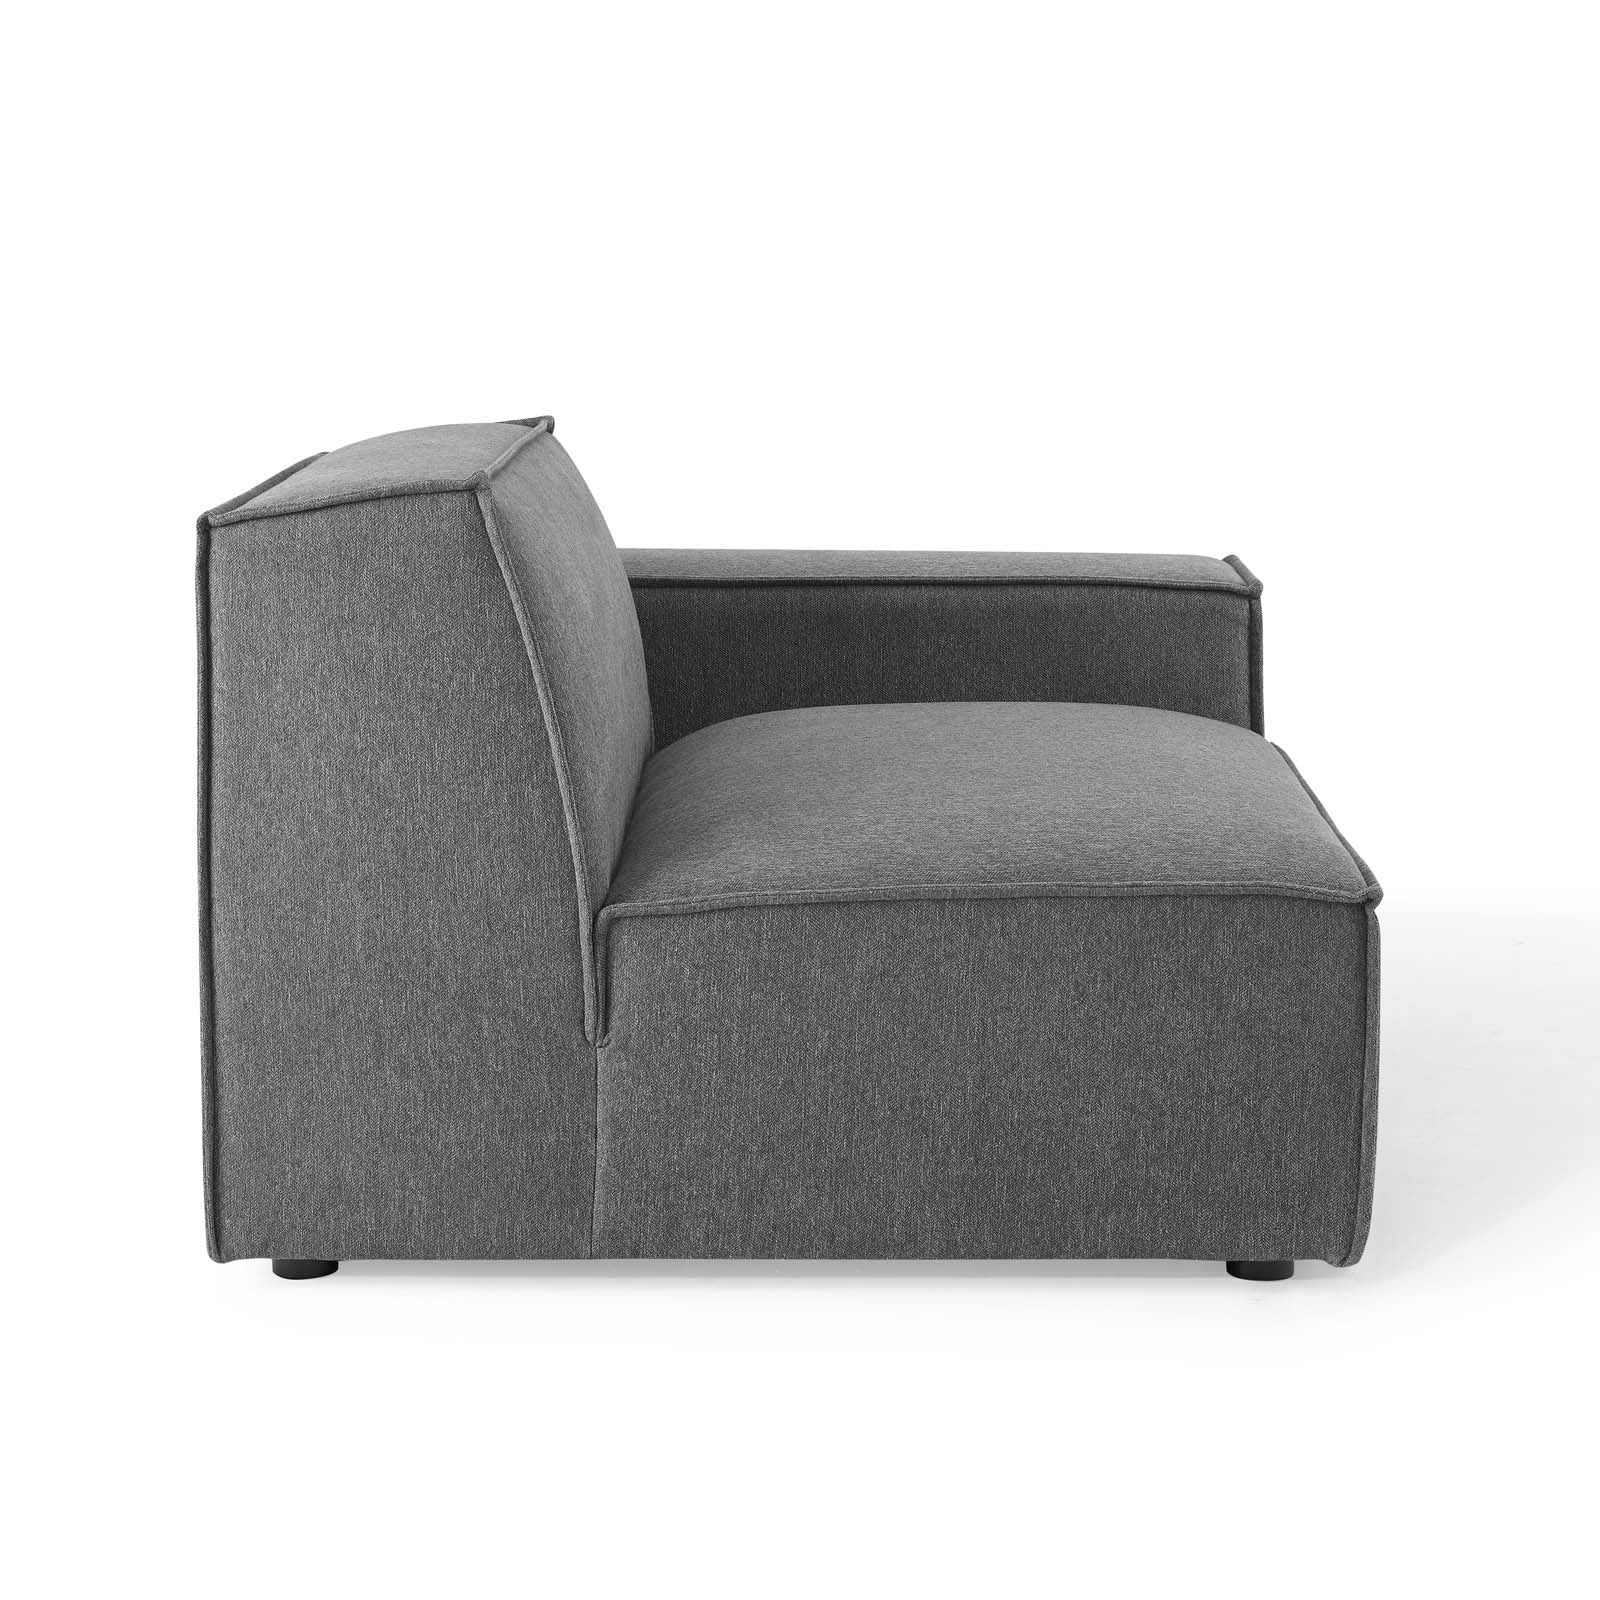 Restore 5-Piece Sectional Sofa - East Shore Modern Home Furnishings